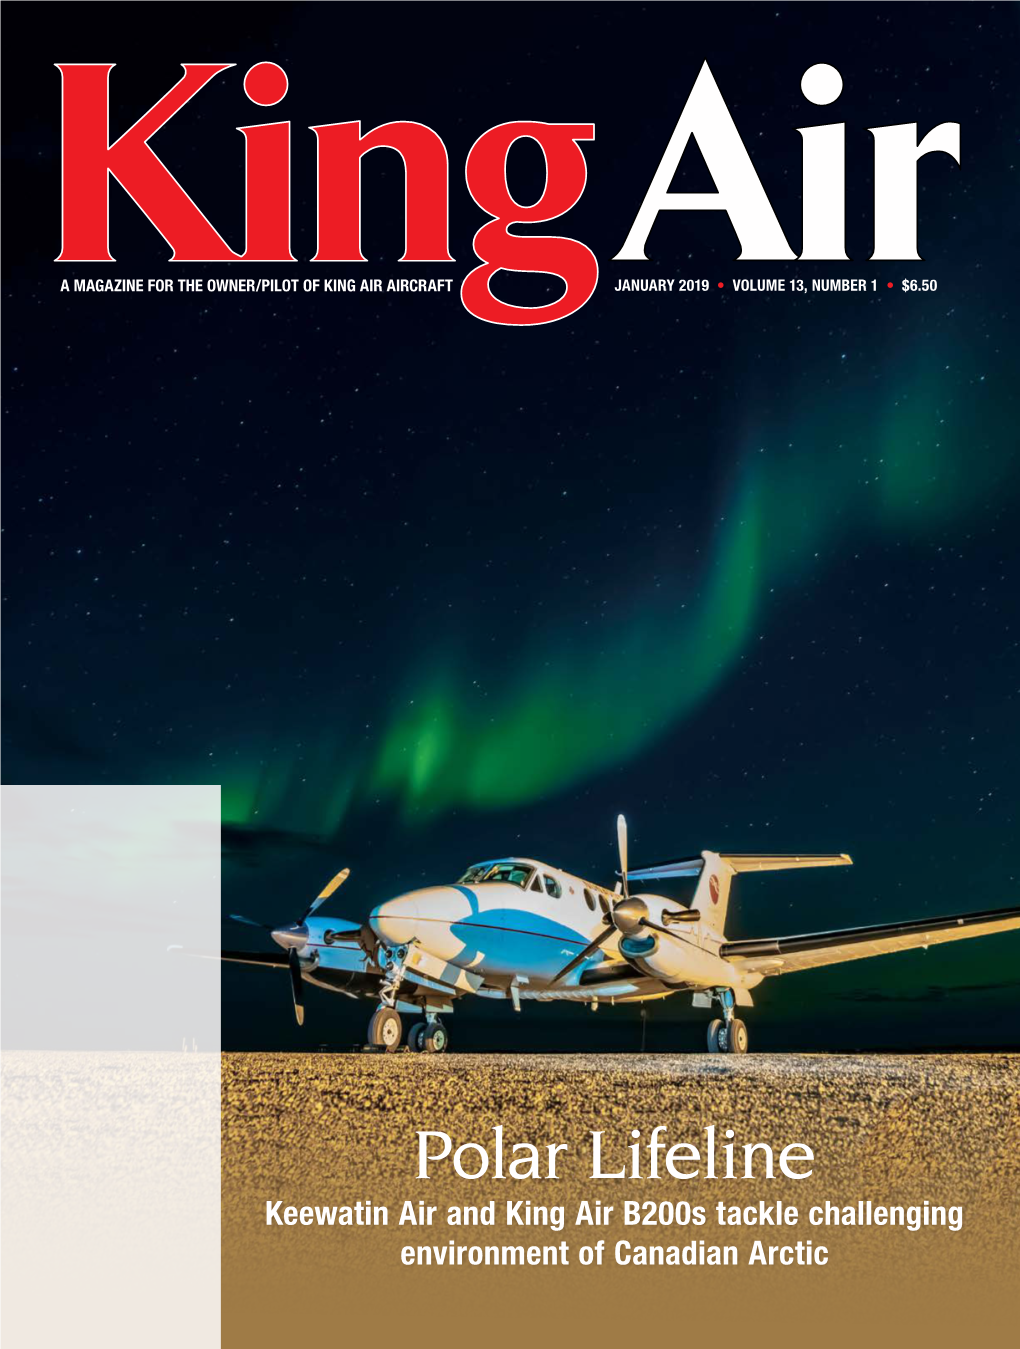 Polar Lifeline Keewatin Air and King Air B200s Tackle Challenging Environment of Canadian Arctic